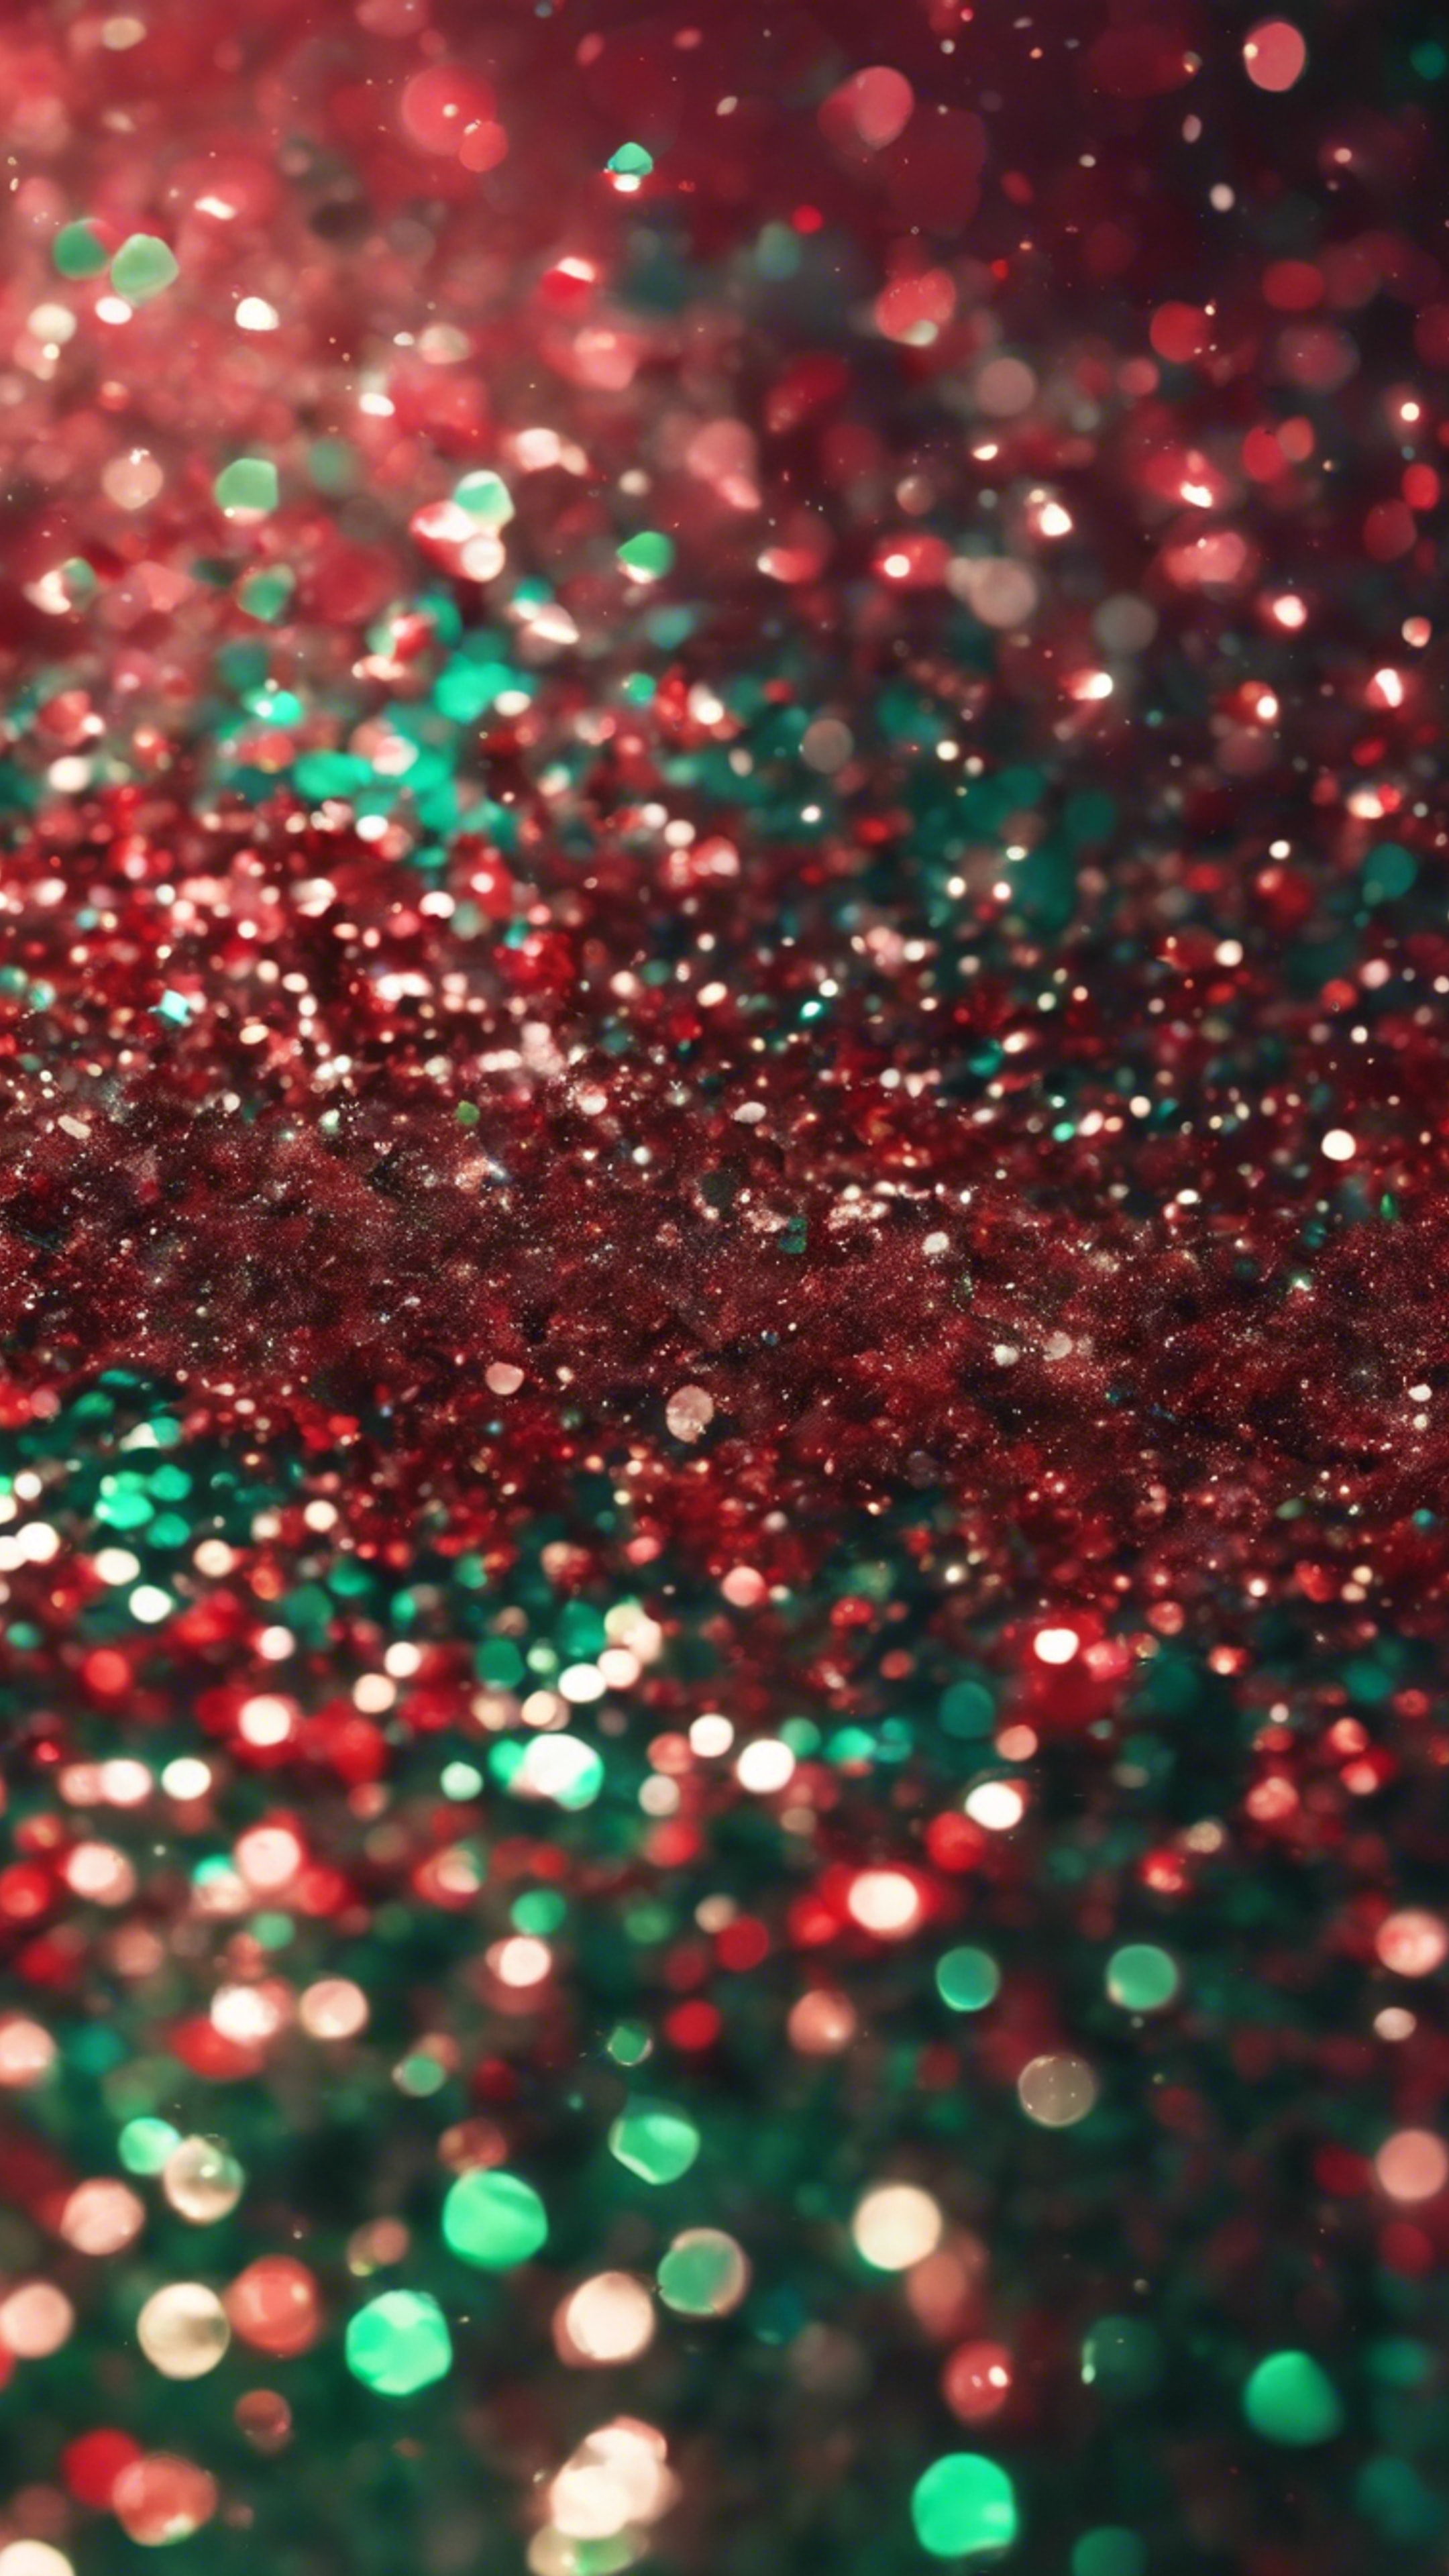 A mix of large and small particles of red and green glitter壁紙[305fad2da0d041f9bf26]